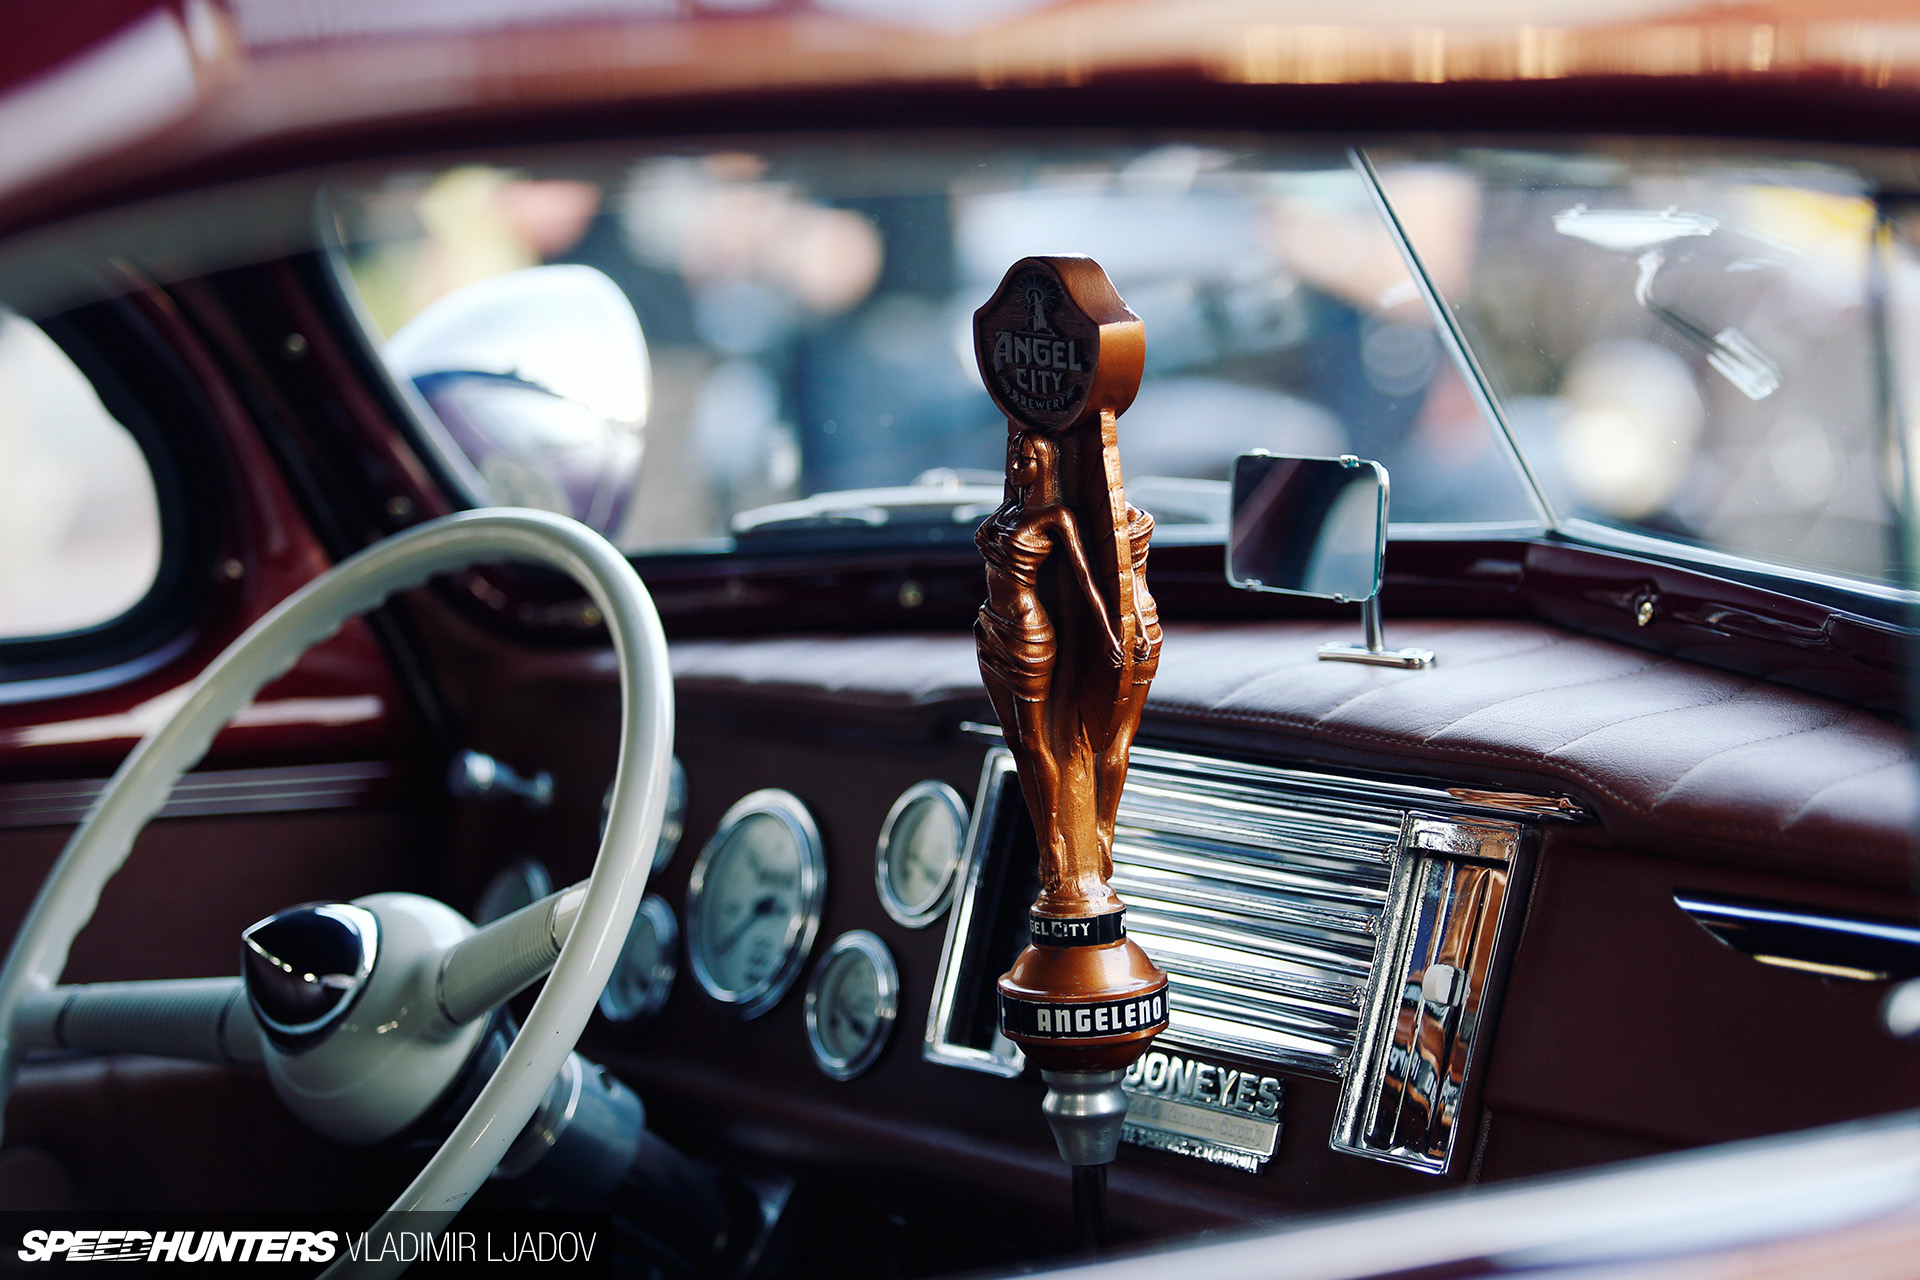 An Introduction To Retro German Tuning Culture - Speedhunters